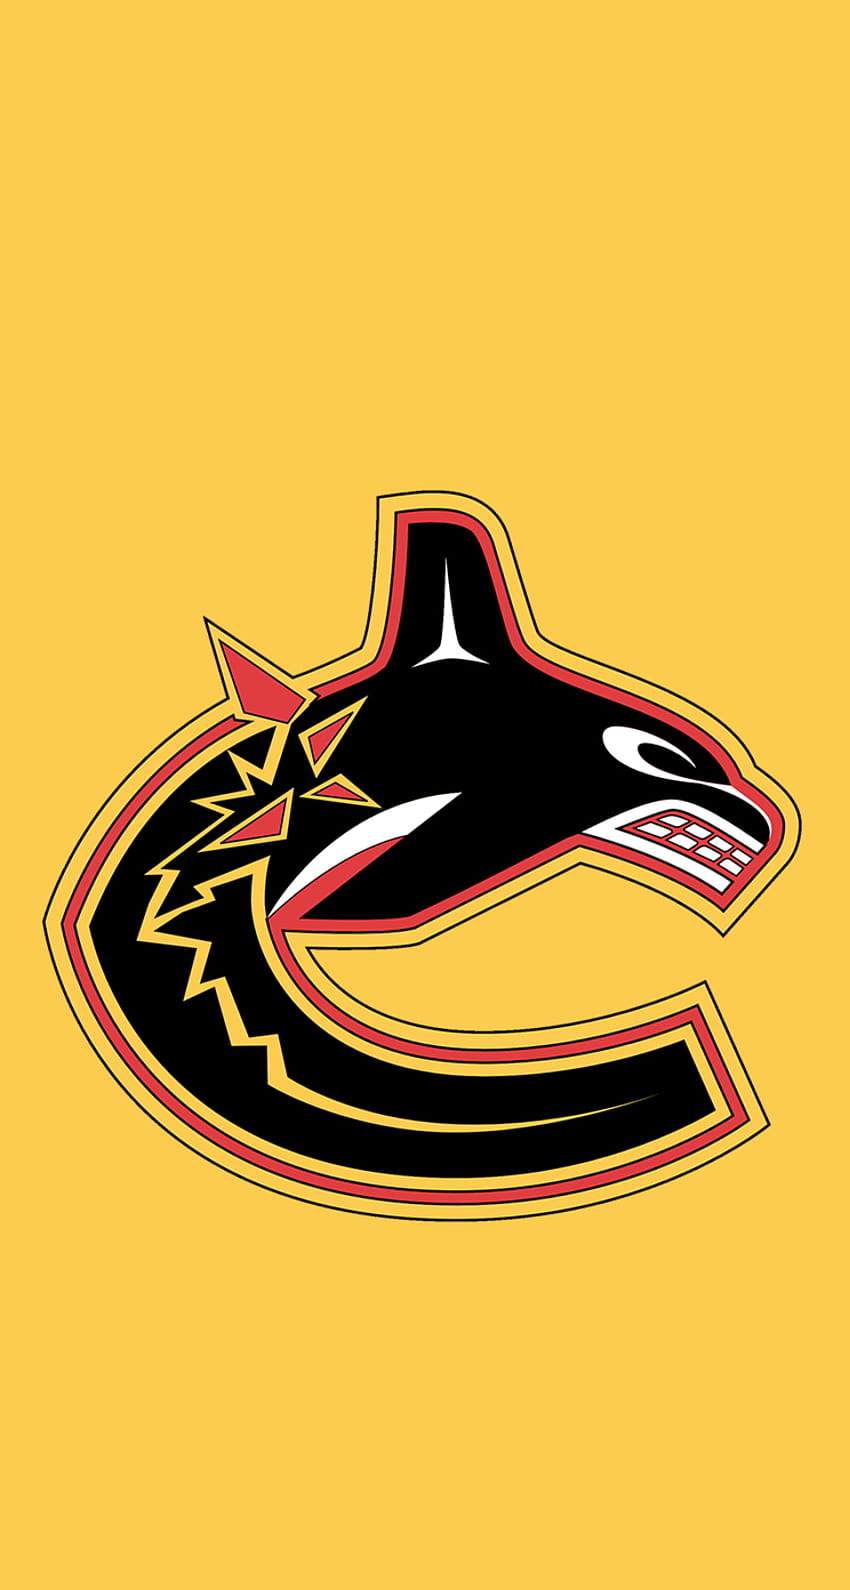 Best Vancouver canucks iPhone HD Wallpapers - iLikeWallpaper